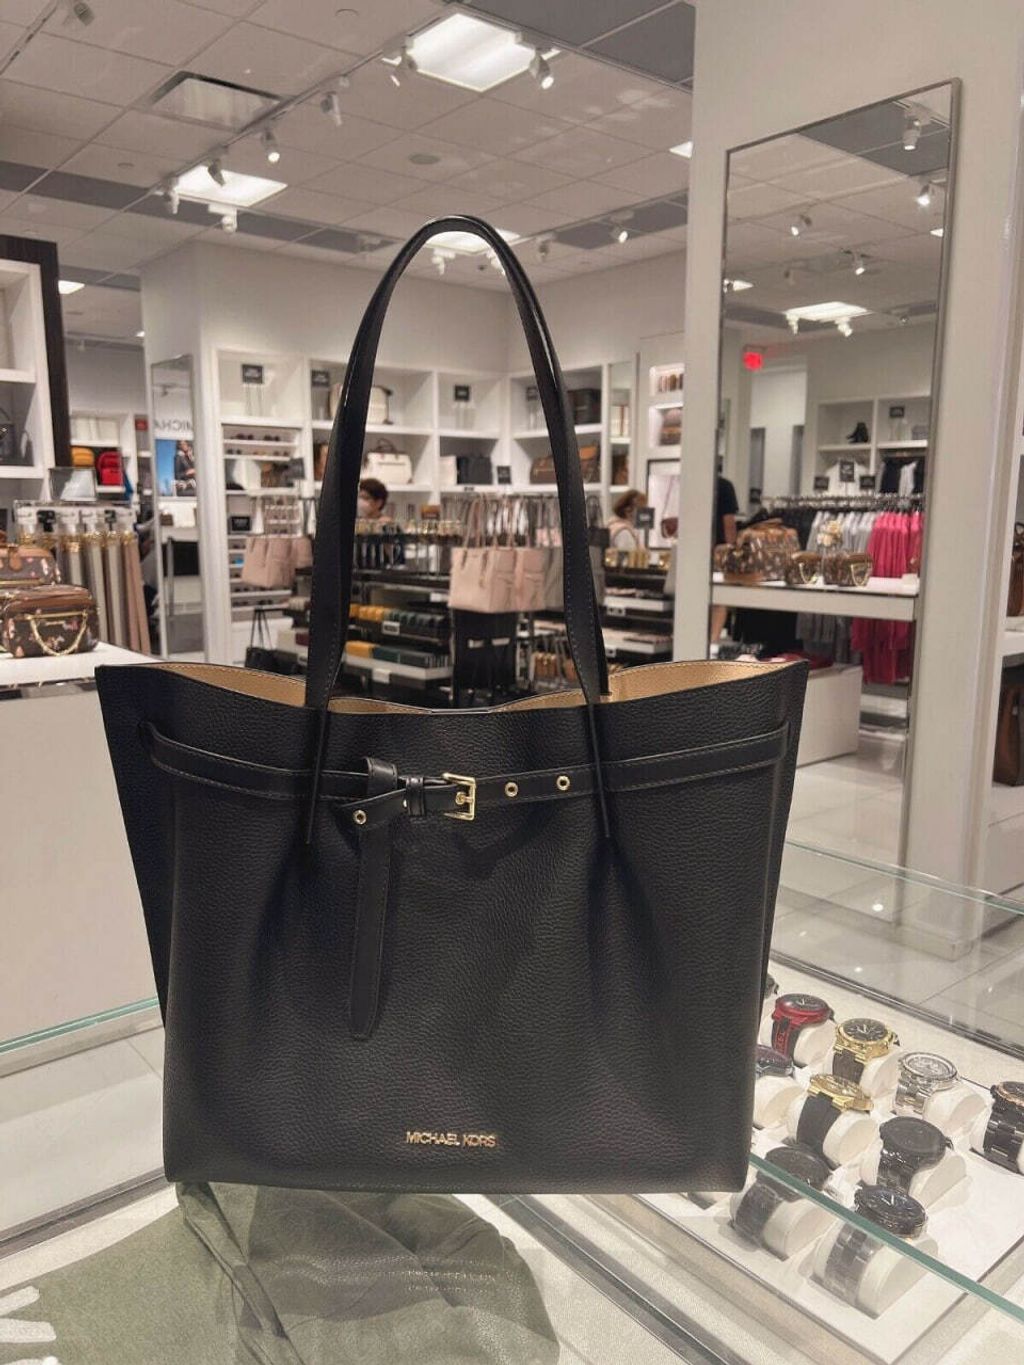 Michael Kors Emilia Large Tote in Black – Personal Shopper USA Outlet